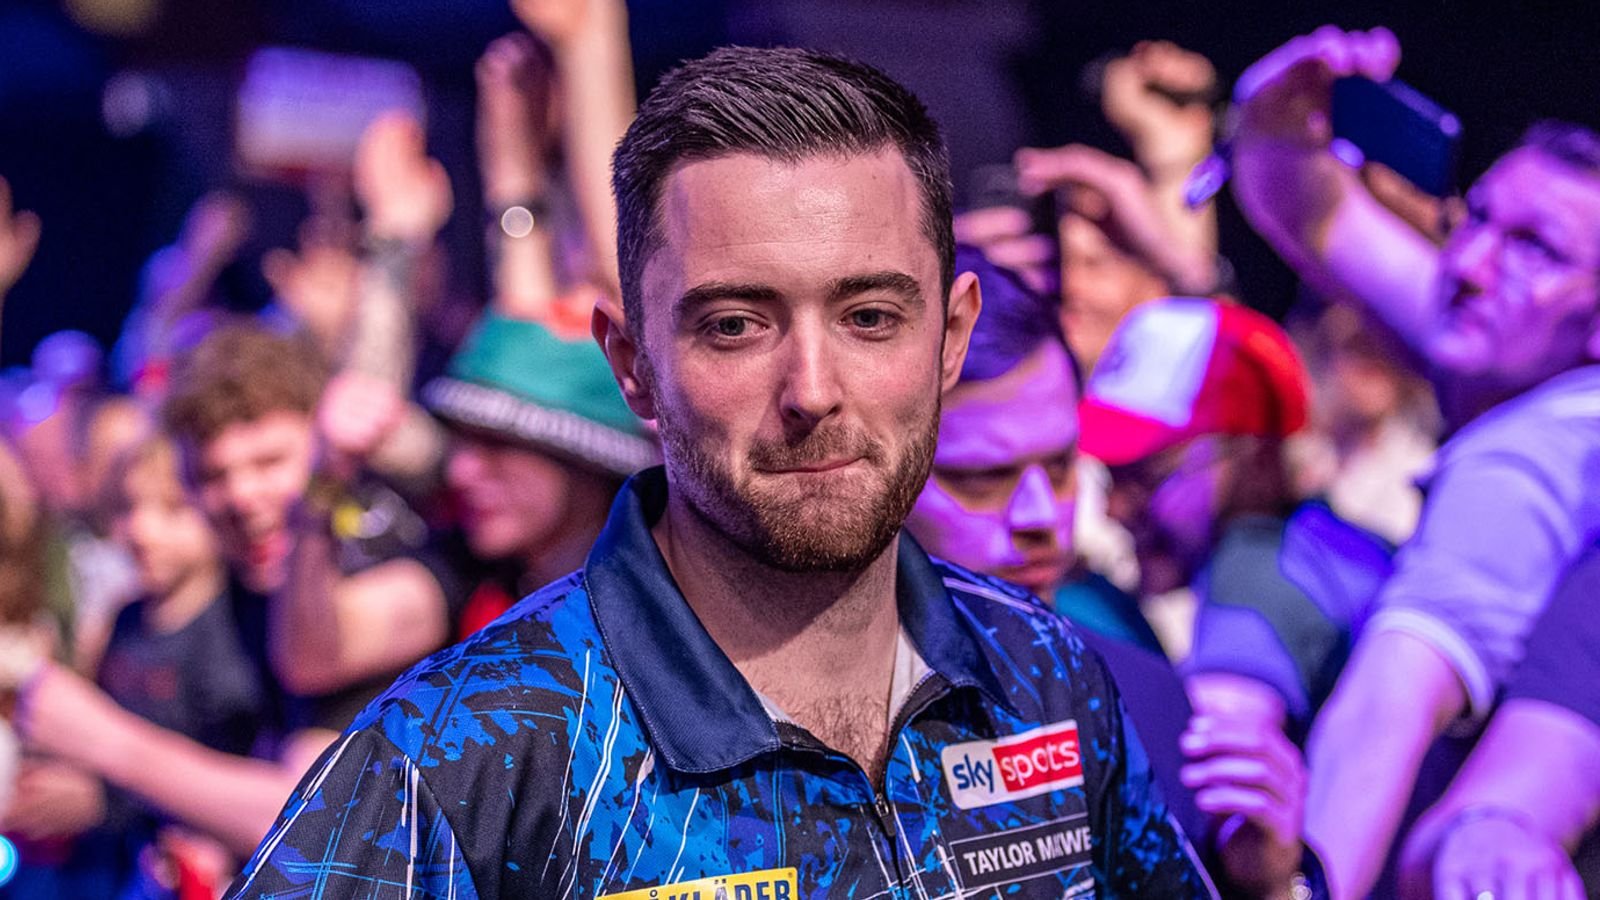 Premier League Darts: Luke Humphries secures second night win in a row as Luke Littler comes close to nine-darter | Darts News